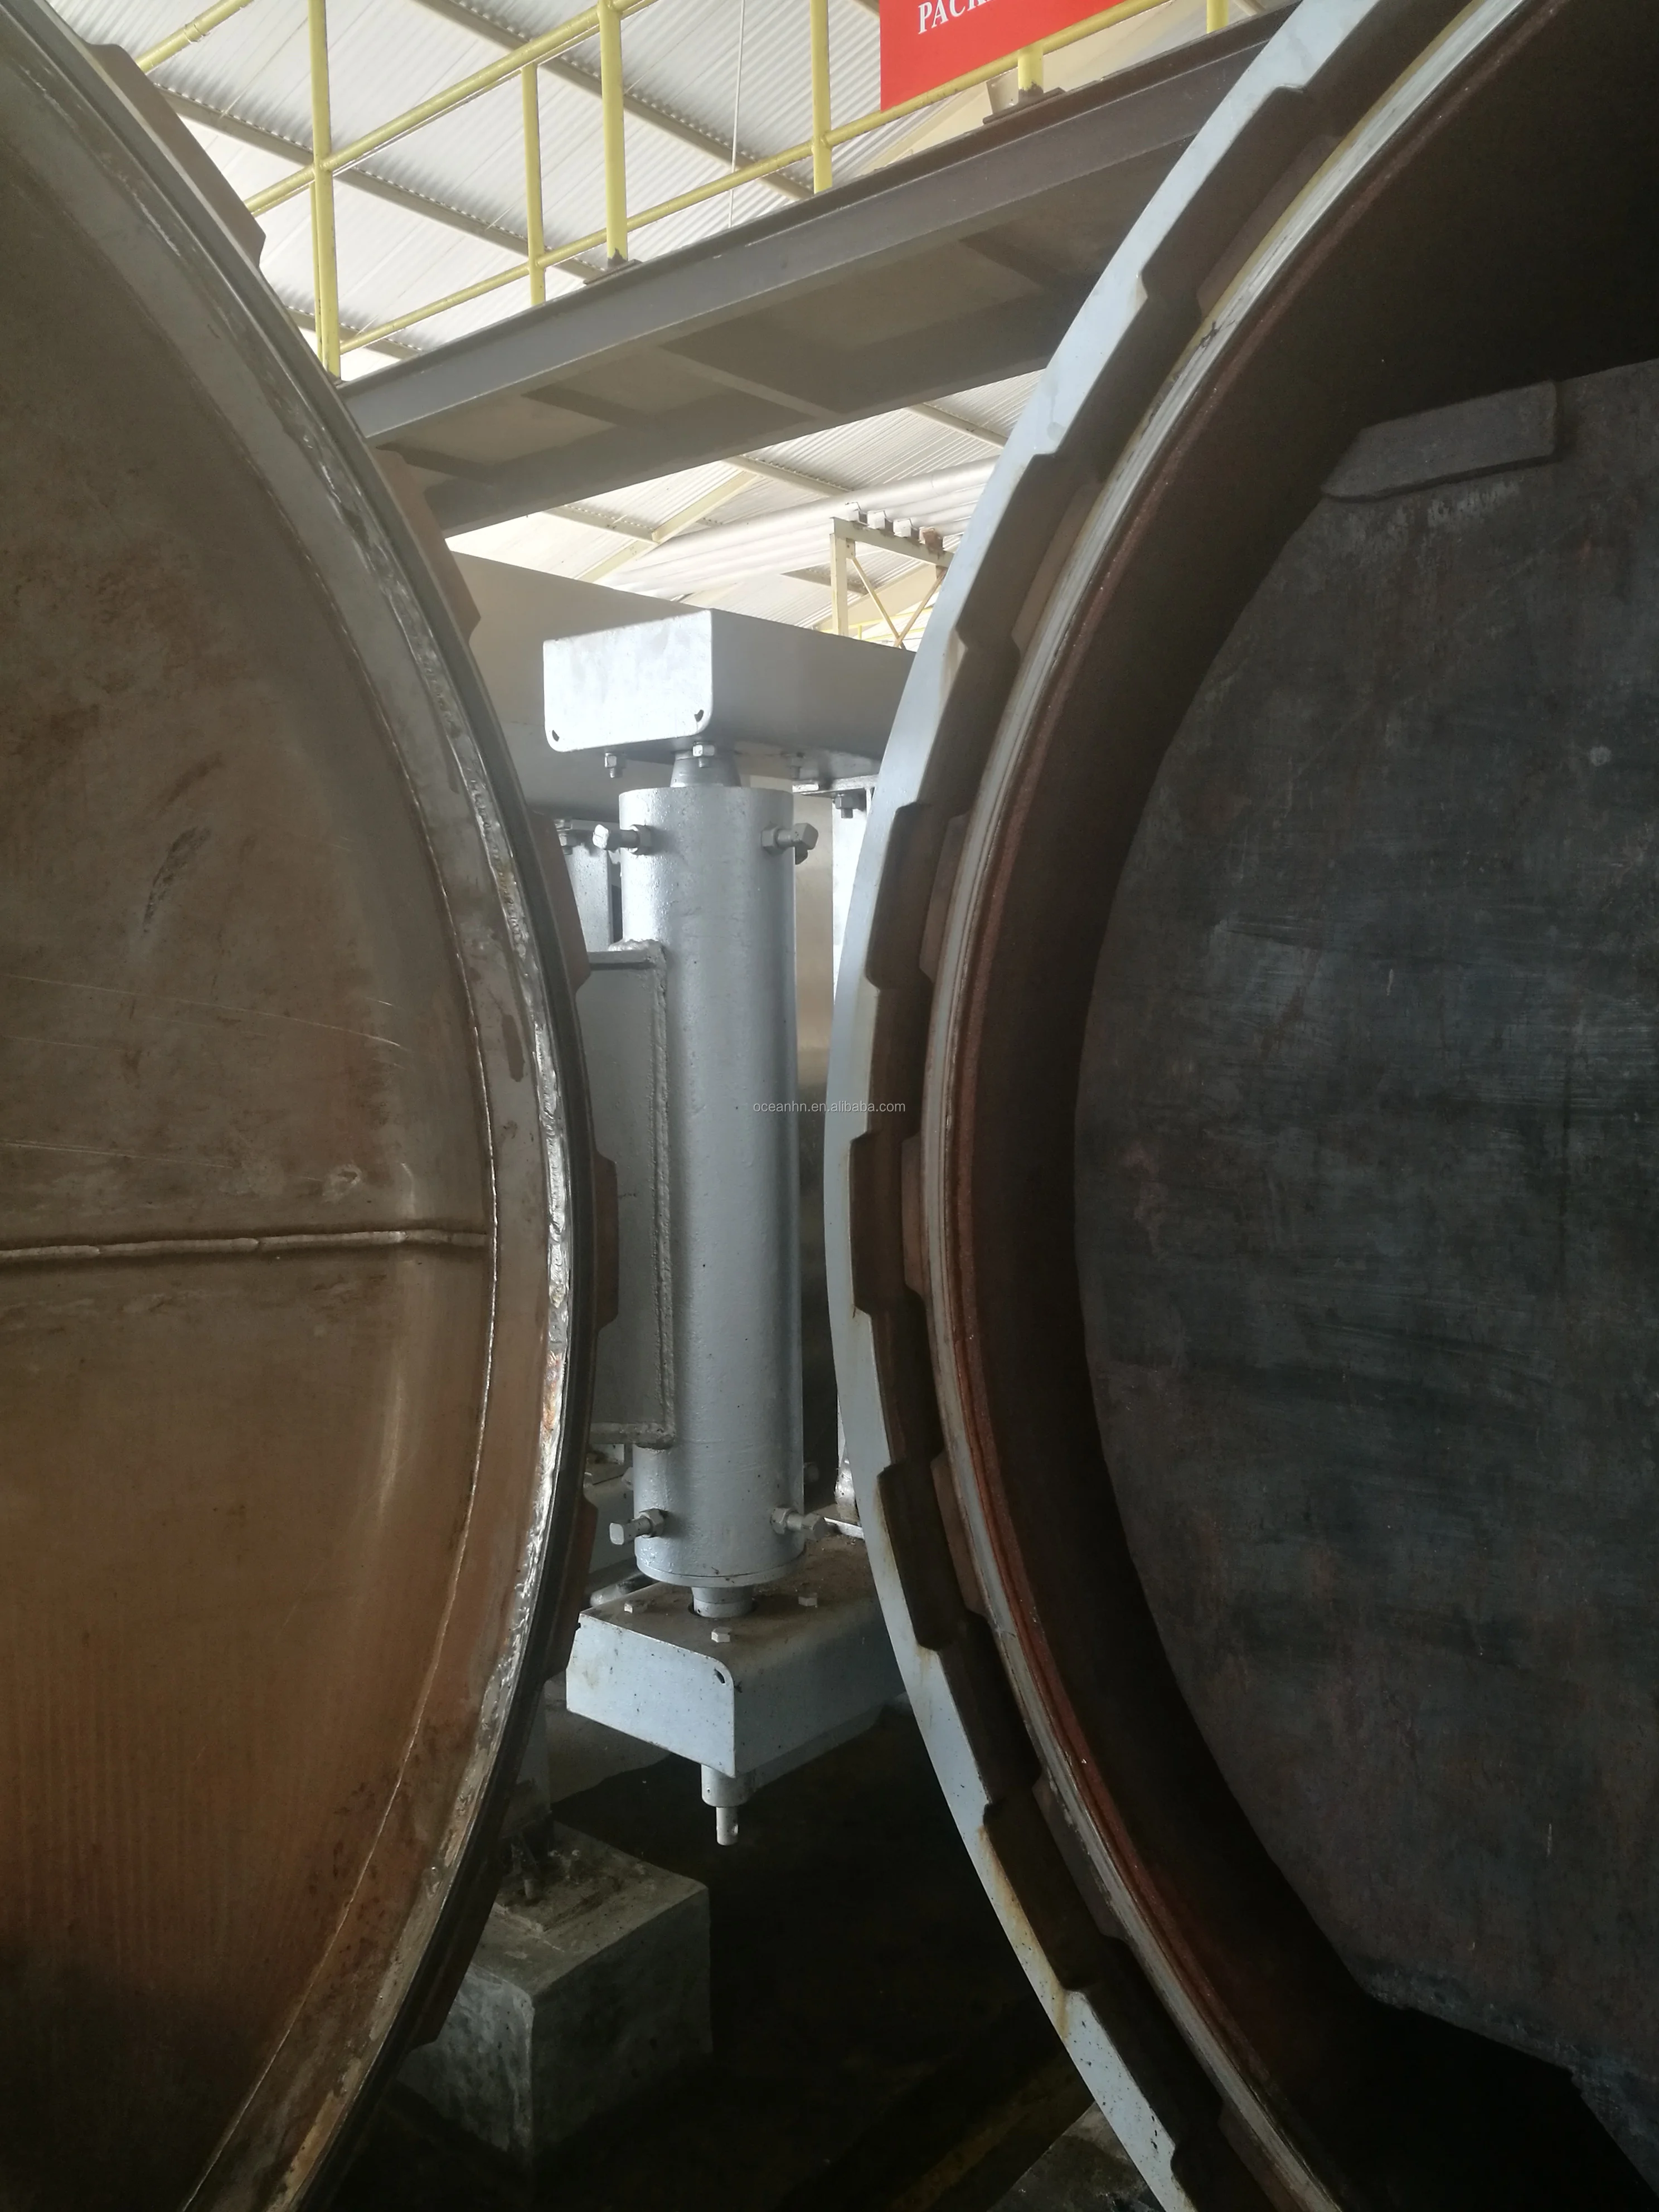 Used palm oil refining machine refining of crude palm kernel oil refined bleached deodorized palm oil